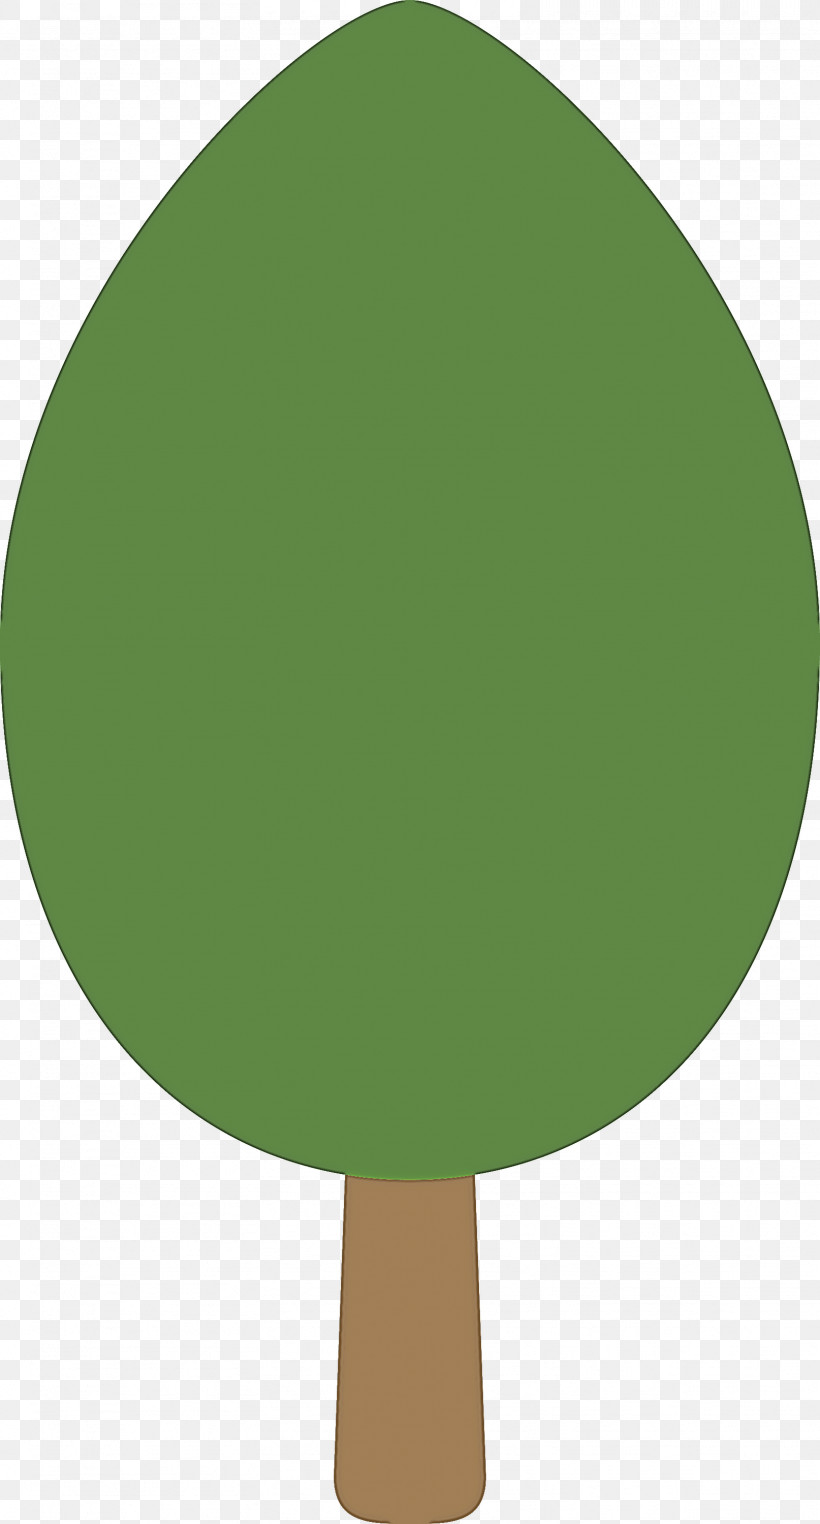 Green Leaf Tree Plant Ping Pong, PNG, 1614x3000px, Abstract Tree, Cartoon Tree, Green, Leaf, Ping Pong Download Free